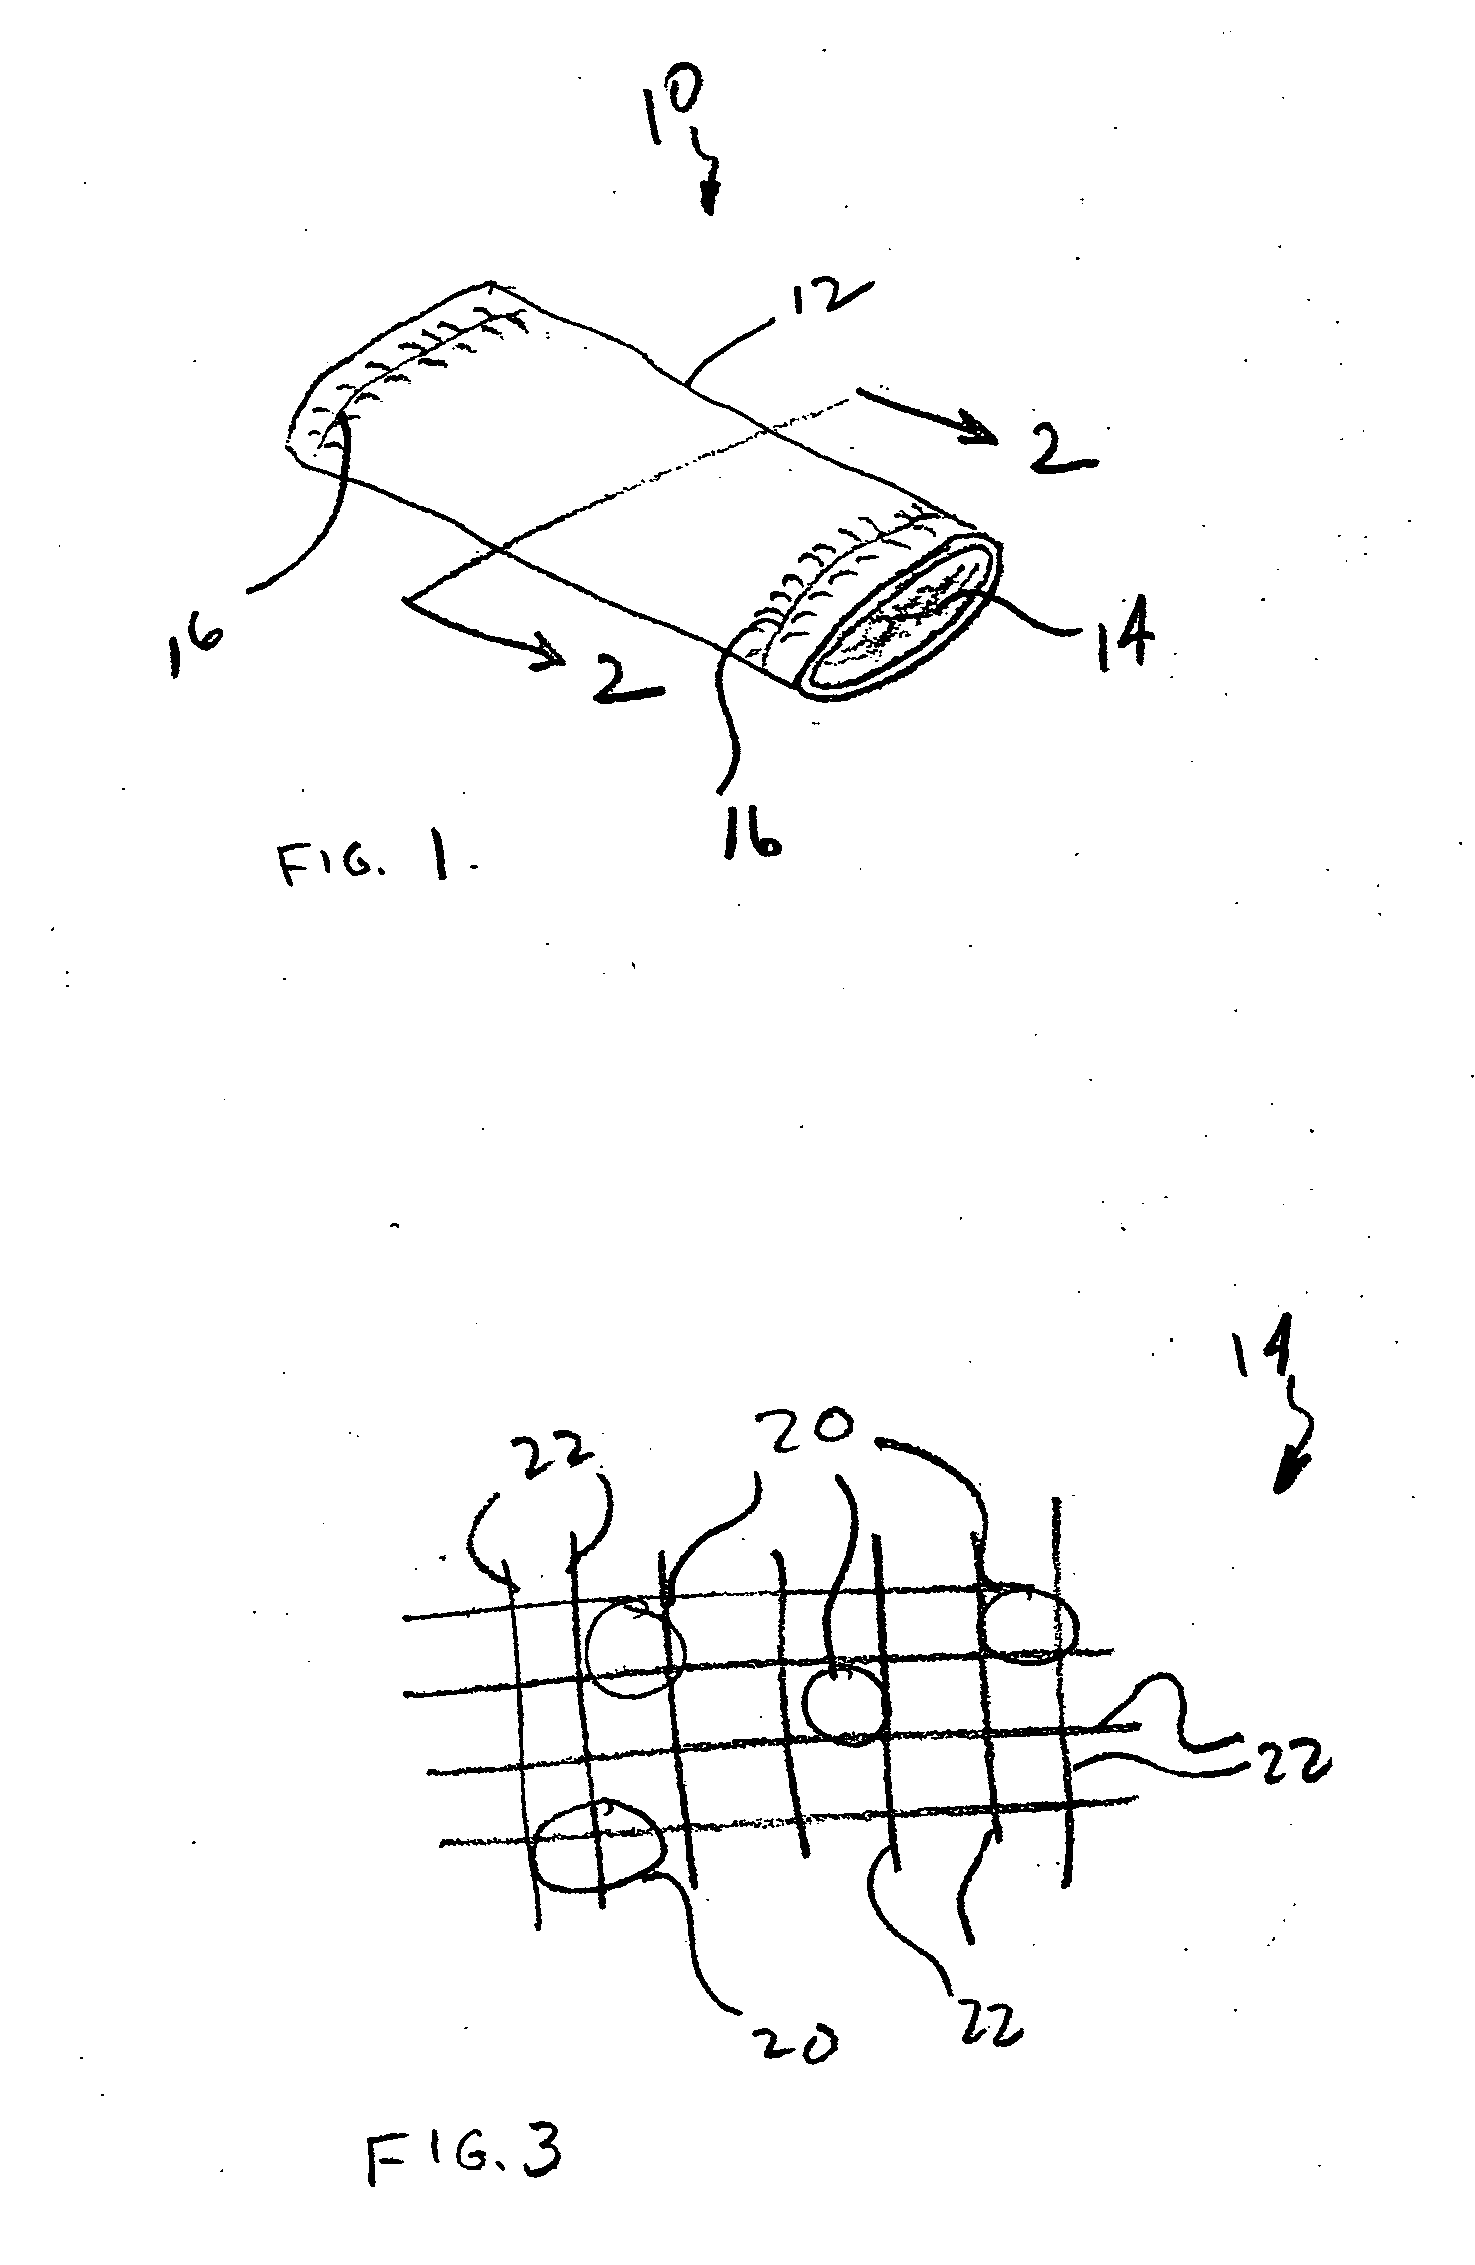 Device for the delivery of blood clotting materials to a wound site